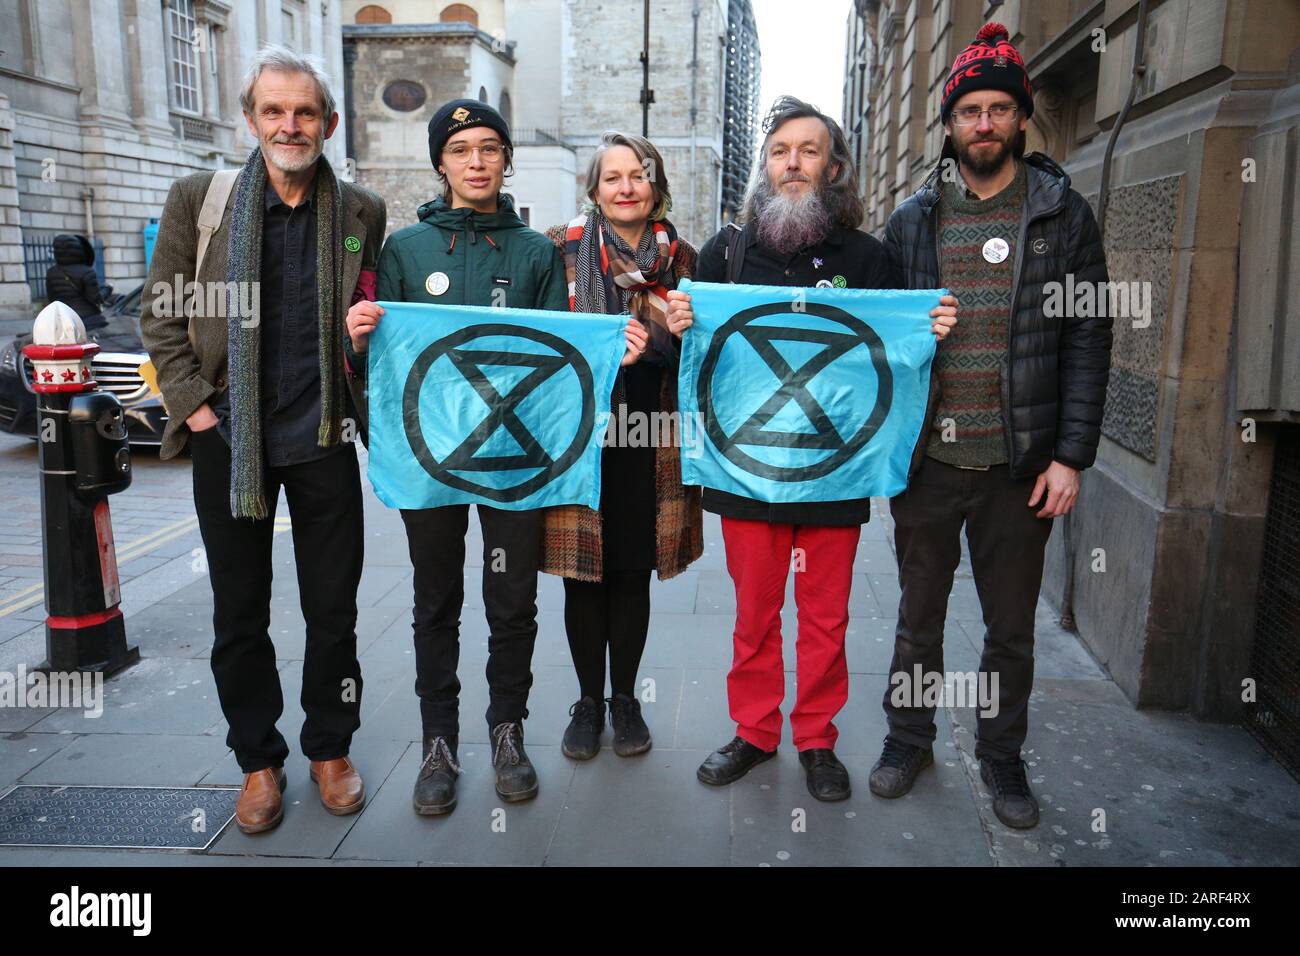 From left to right: David Lambert (left), 60, a historian from Gloucestershire, Phoebe Valentine, 23, a maths student from Brighton, Claudia Fisher, 57, a business woman from Brighton, Senan Clifford, 59, a former teacher from Gloucestershire, and Ben Bont (right), 42, a tree surgeon from West Wales, arrive at the City of London Magistrates' Court, after they were arrested on 10 October 2019, during a peaceful demonstration - in which they glued themselves to the concourse between the DLR station and City Airport in east London. Stock Photo